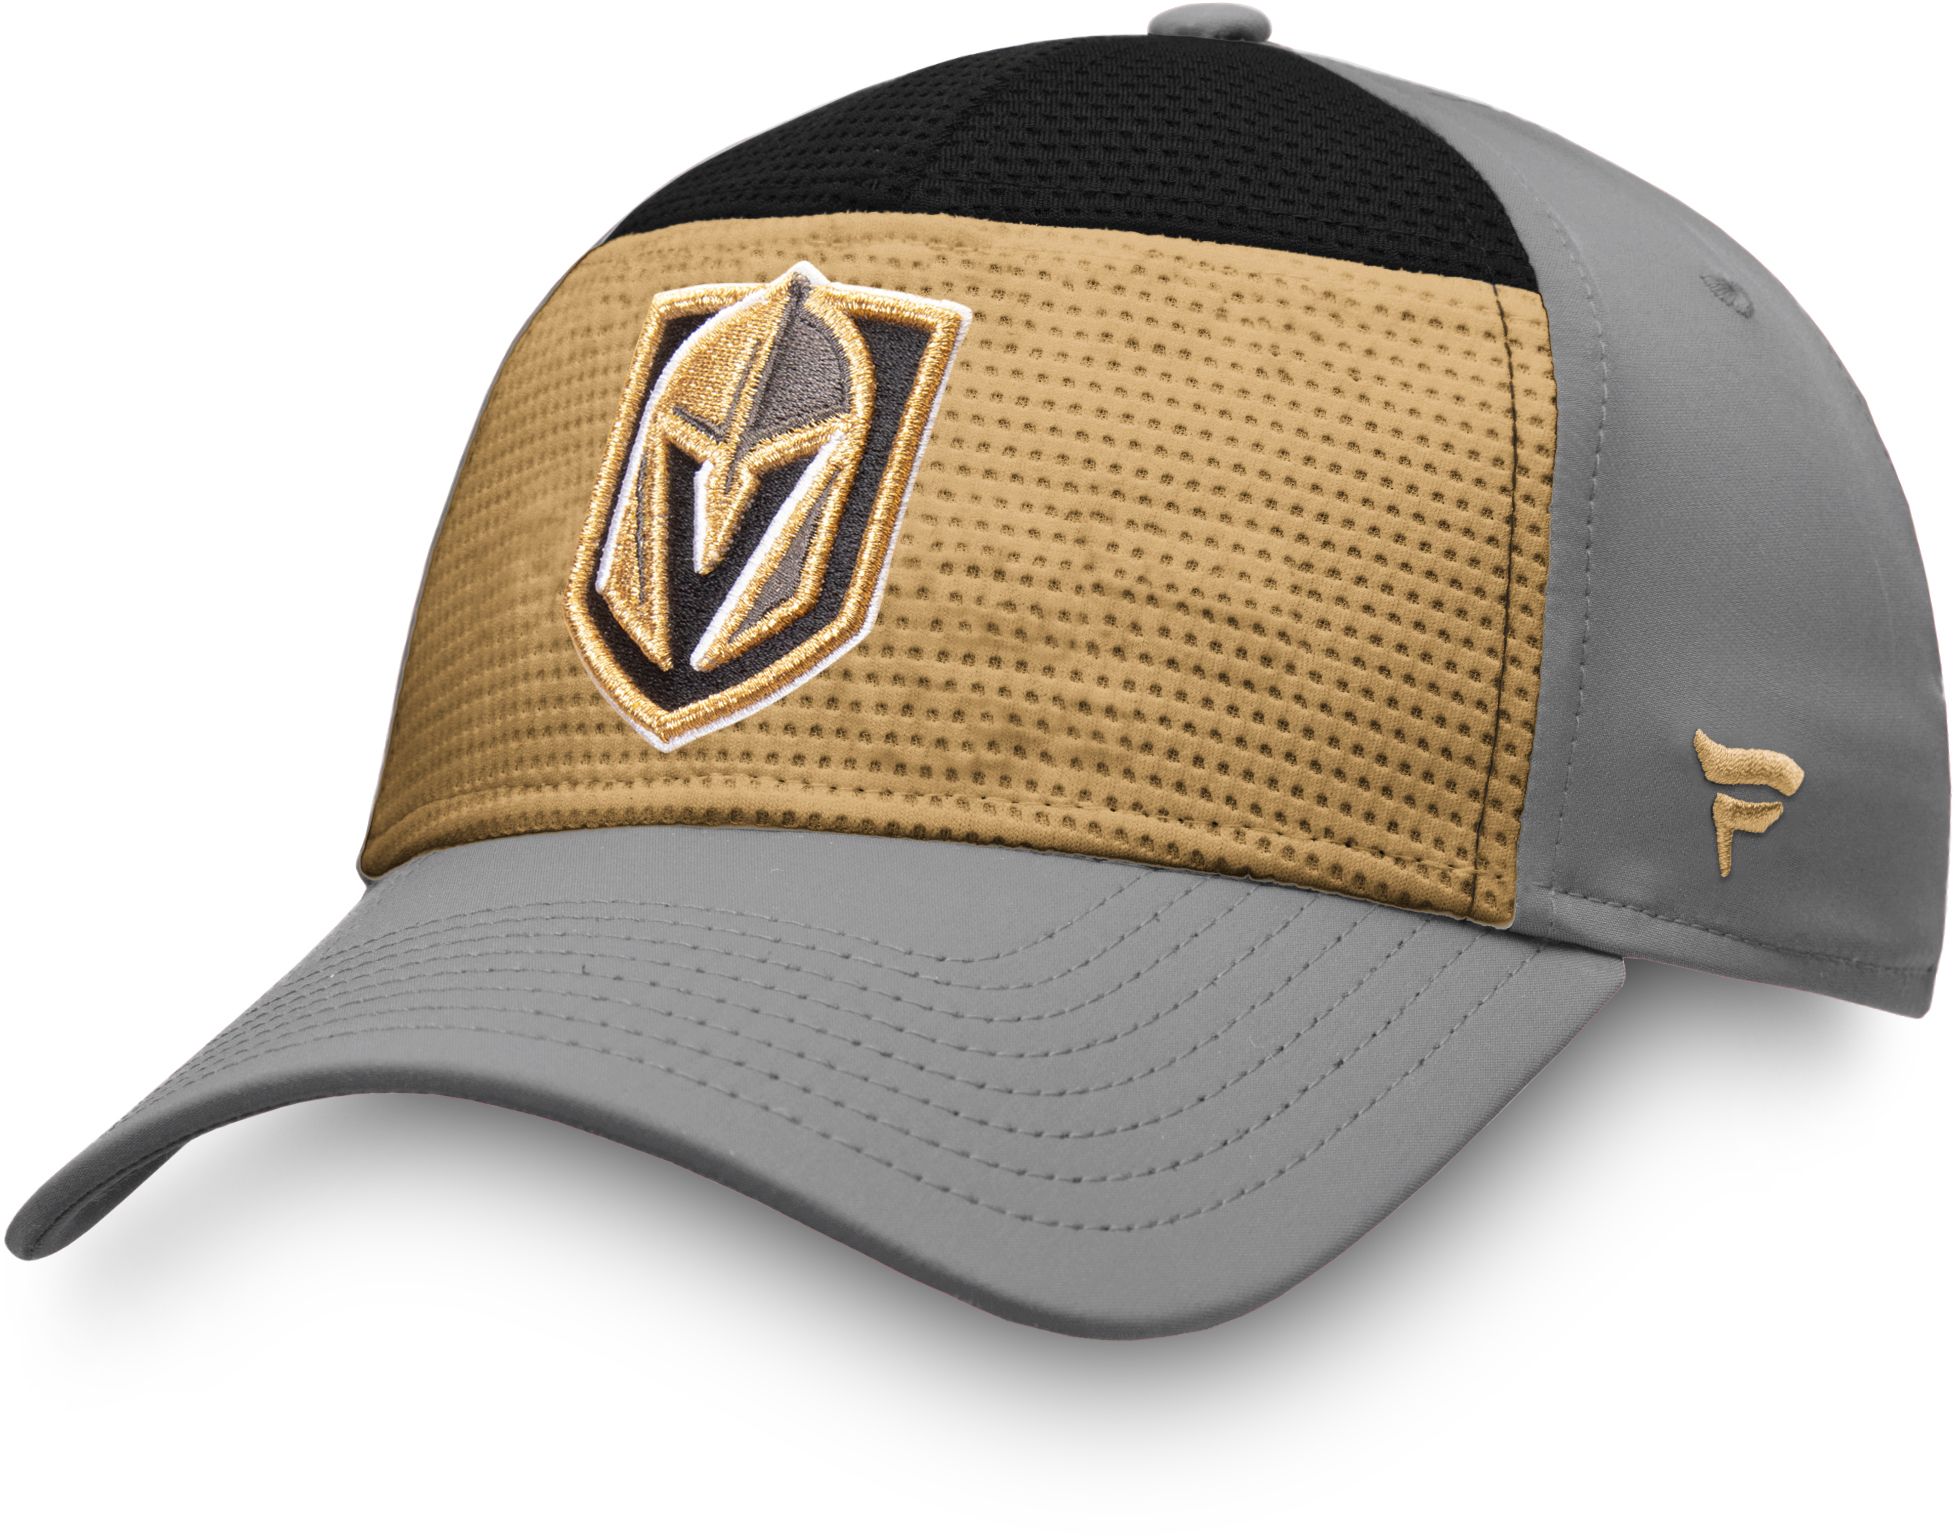 las vegas golden knights fitted hat